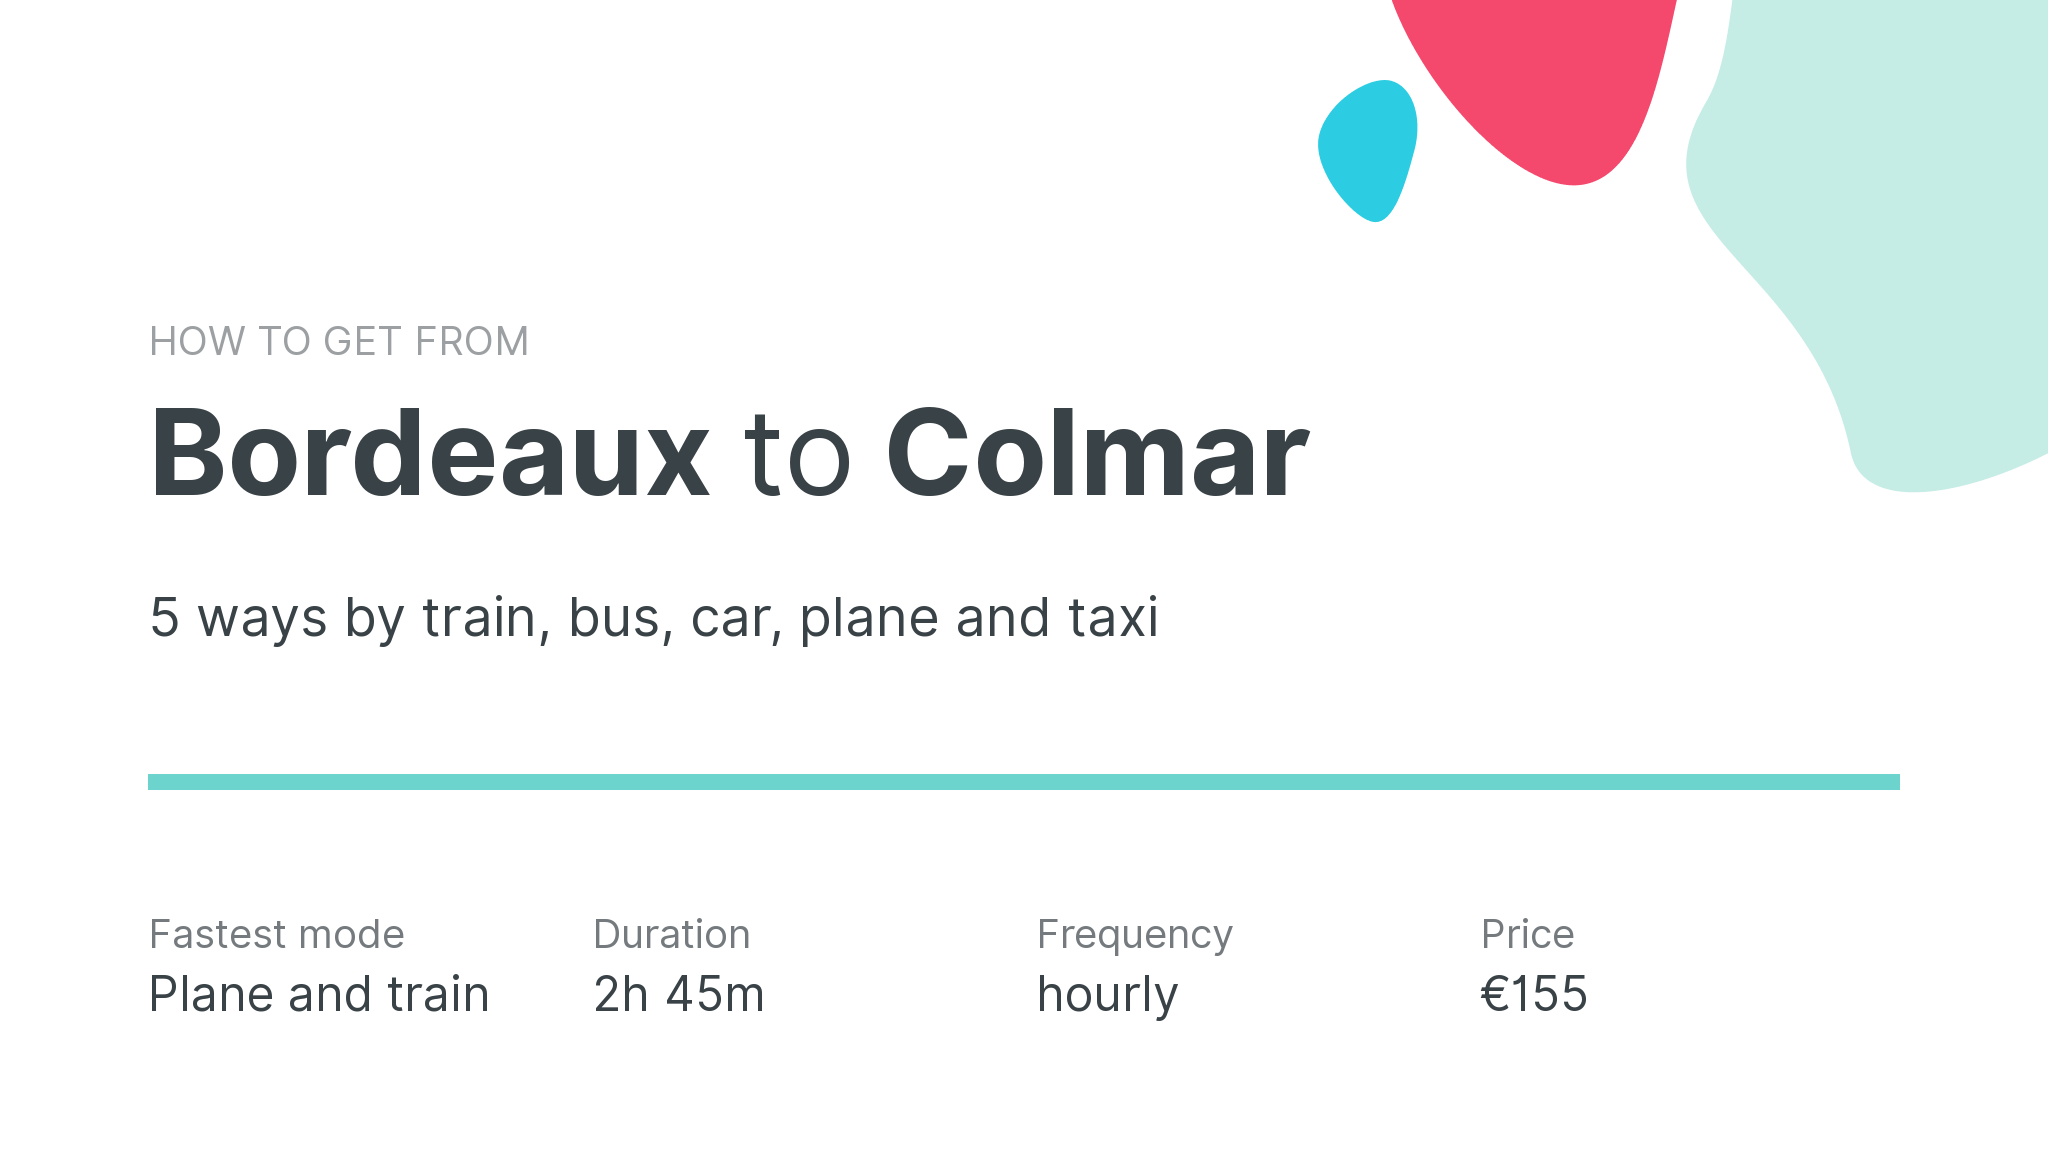 How do I get from Bordeaux to Colmar